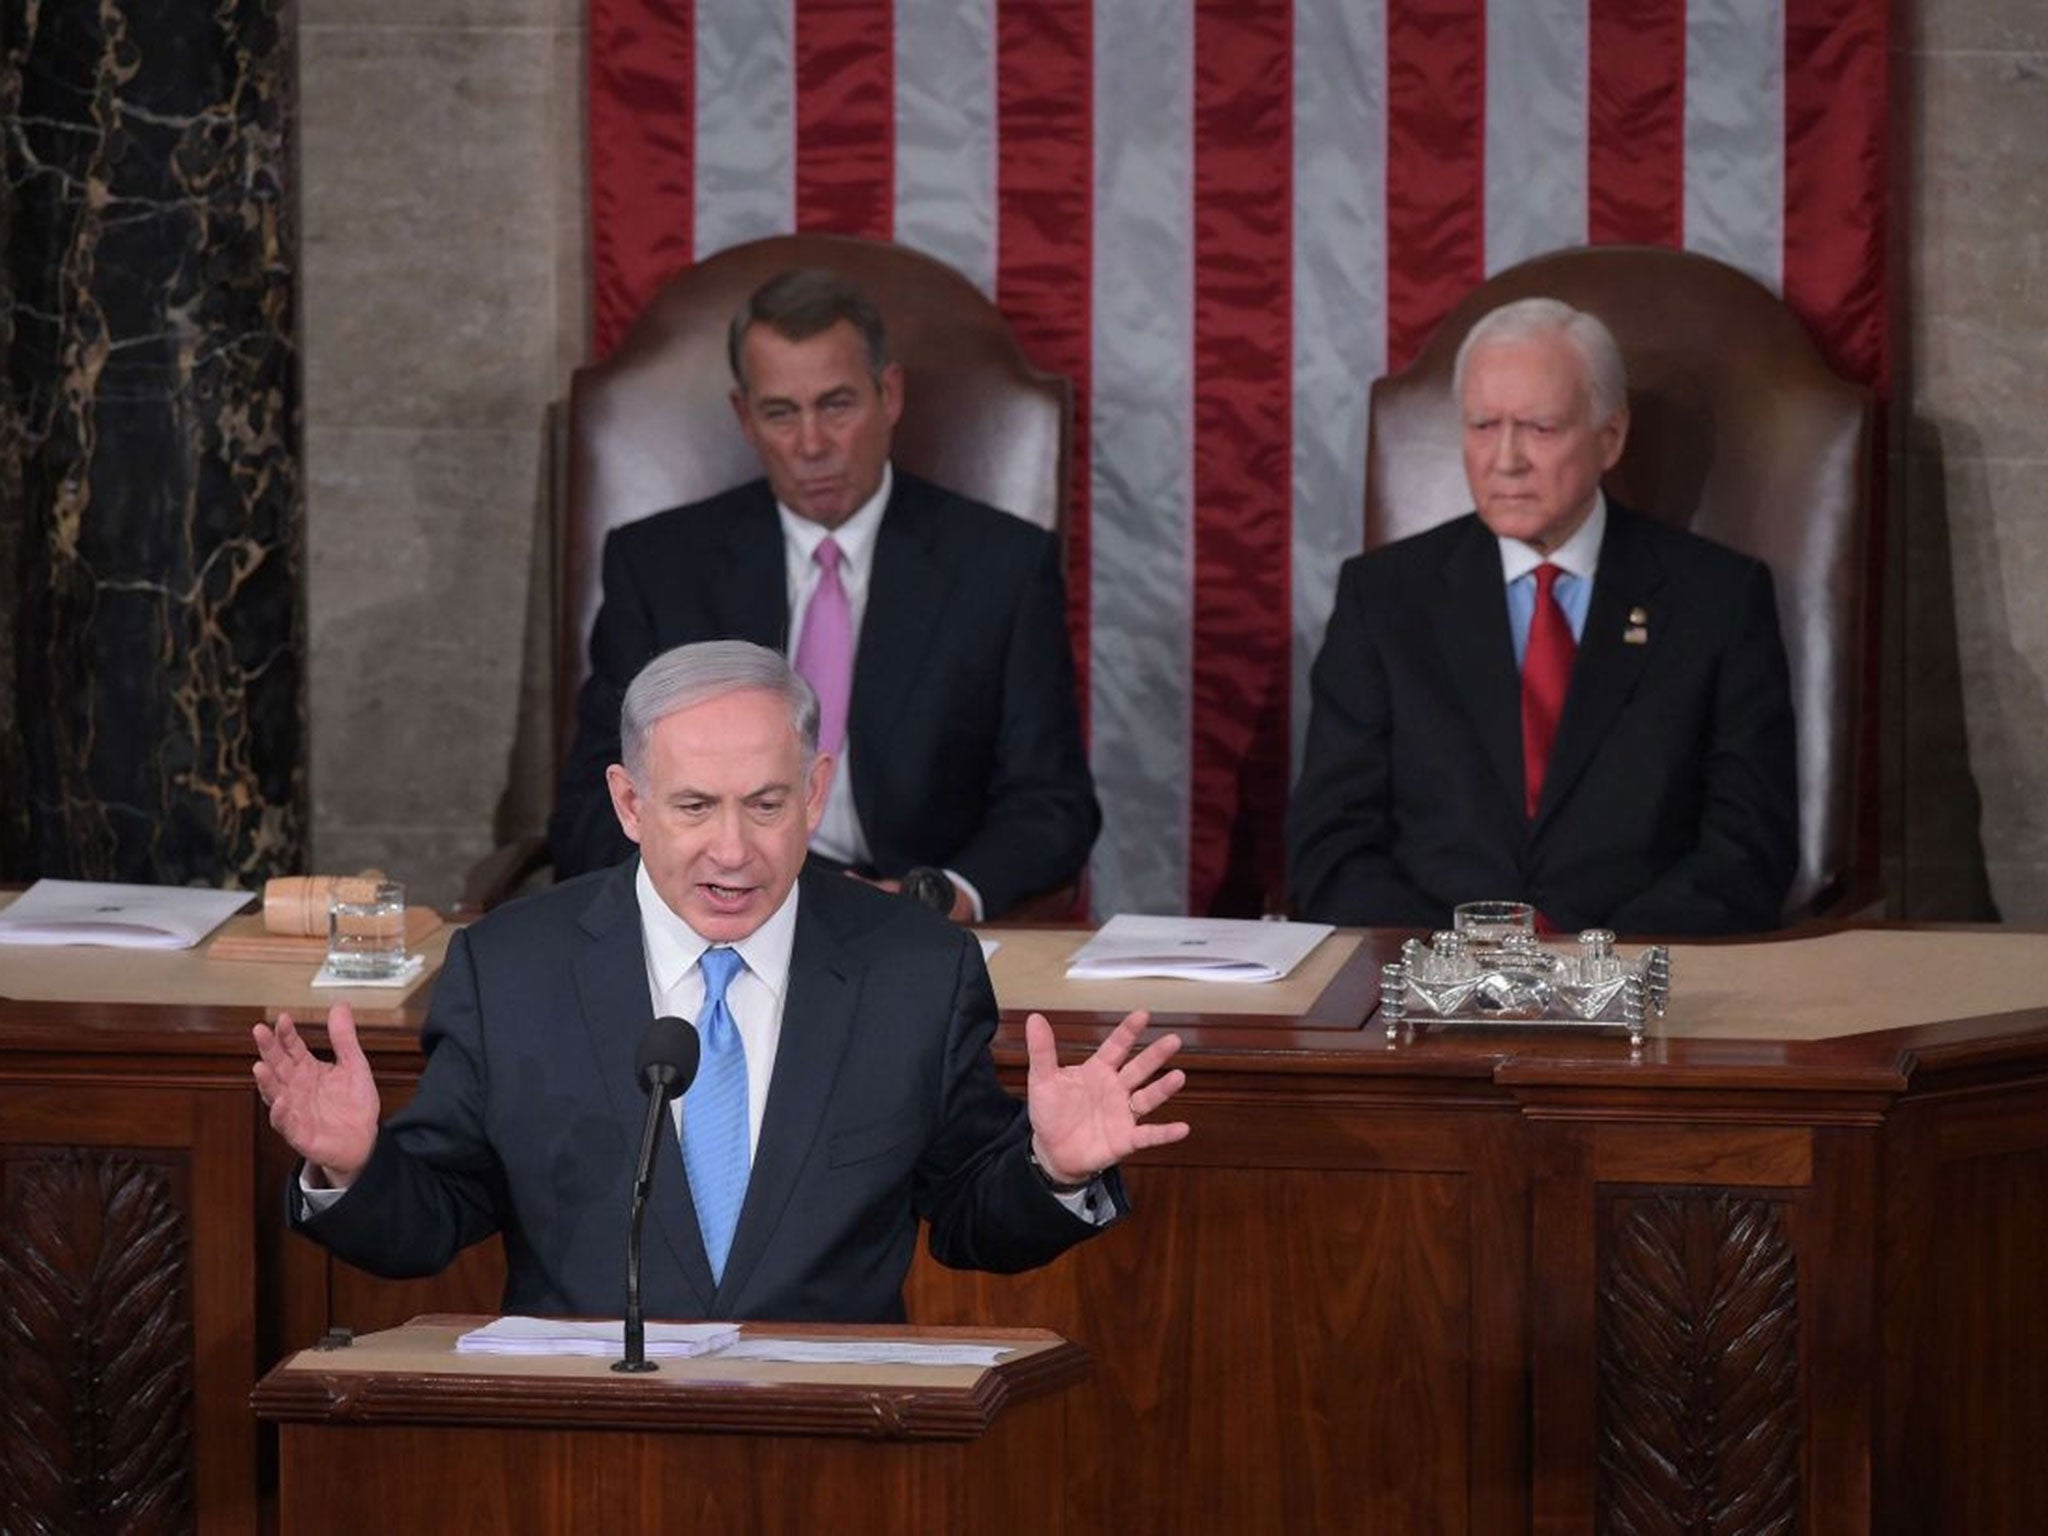 Israel's Prime Minister Benjamin Netanyahu addresses a joint session of the US Congress on March 3, 2015 at the US Capitol in Washington, DC.